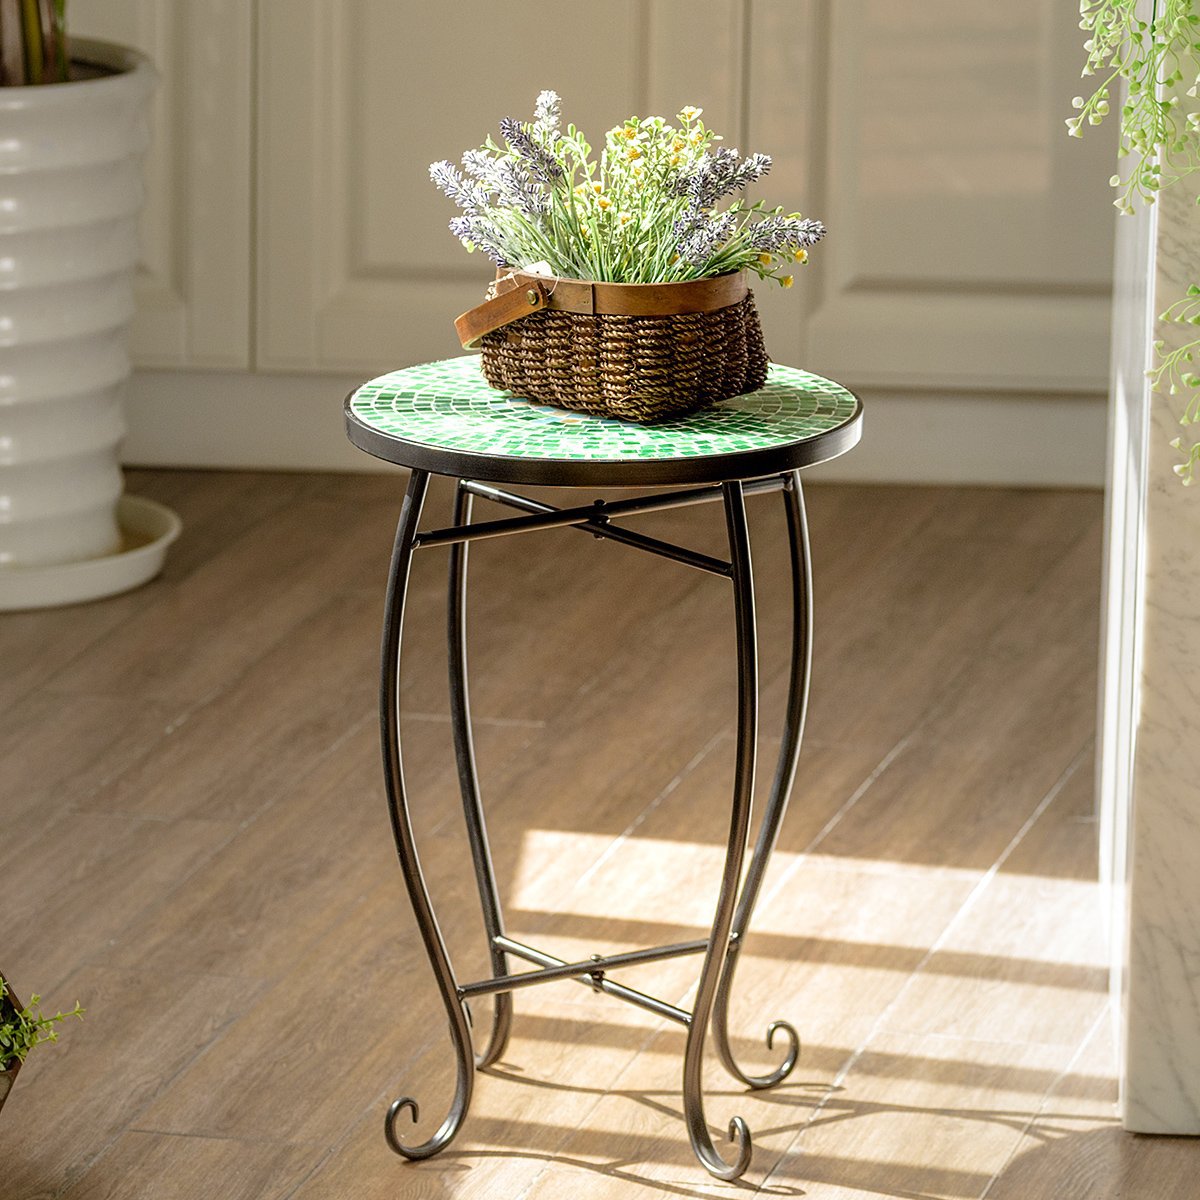 Accent Table Coffee Tables Decor Accent Side End Tables Plant Stand Chair for Bedroom, Living Room, Home Office and Patio - image 1 of 11